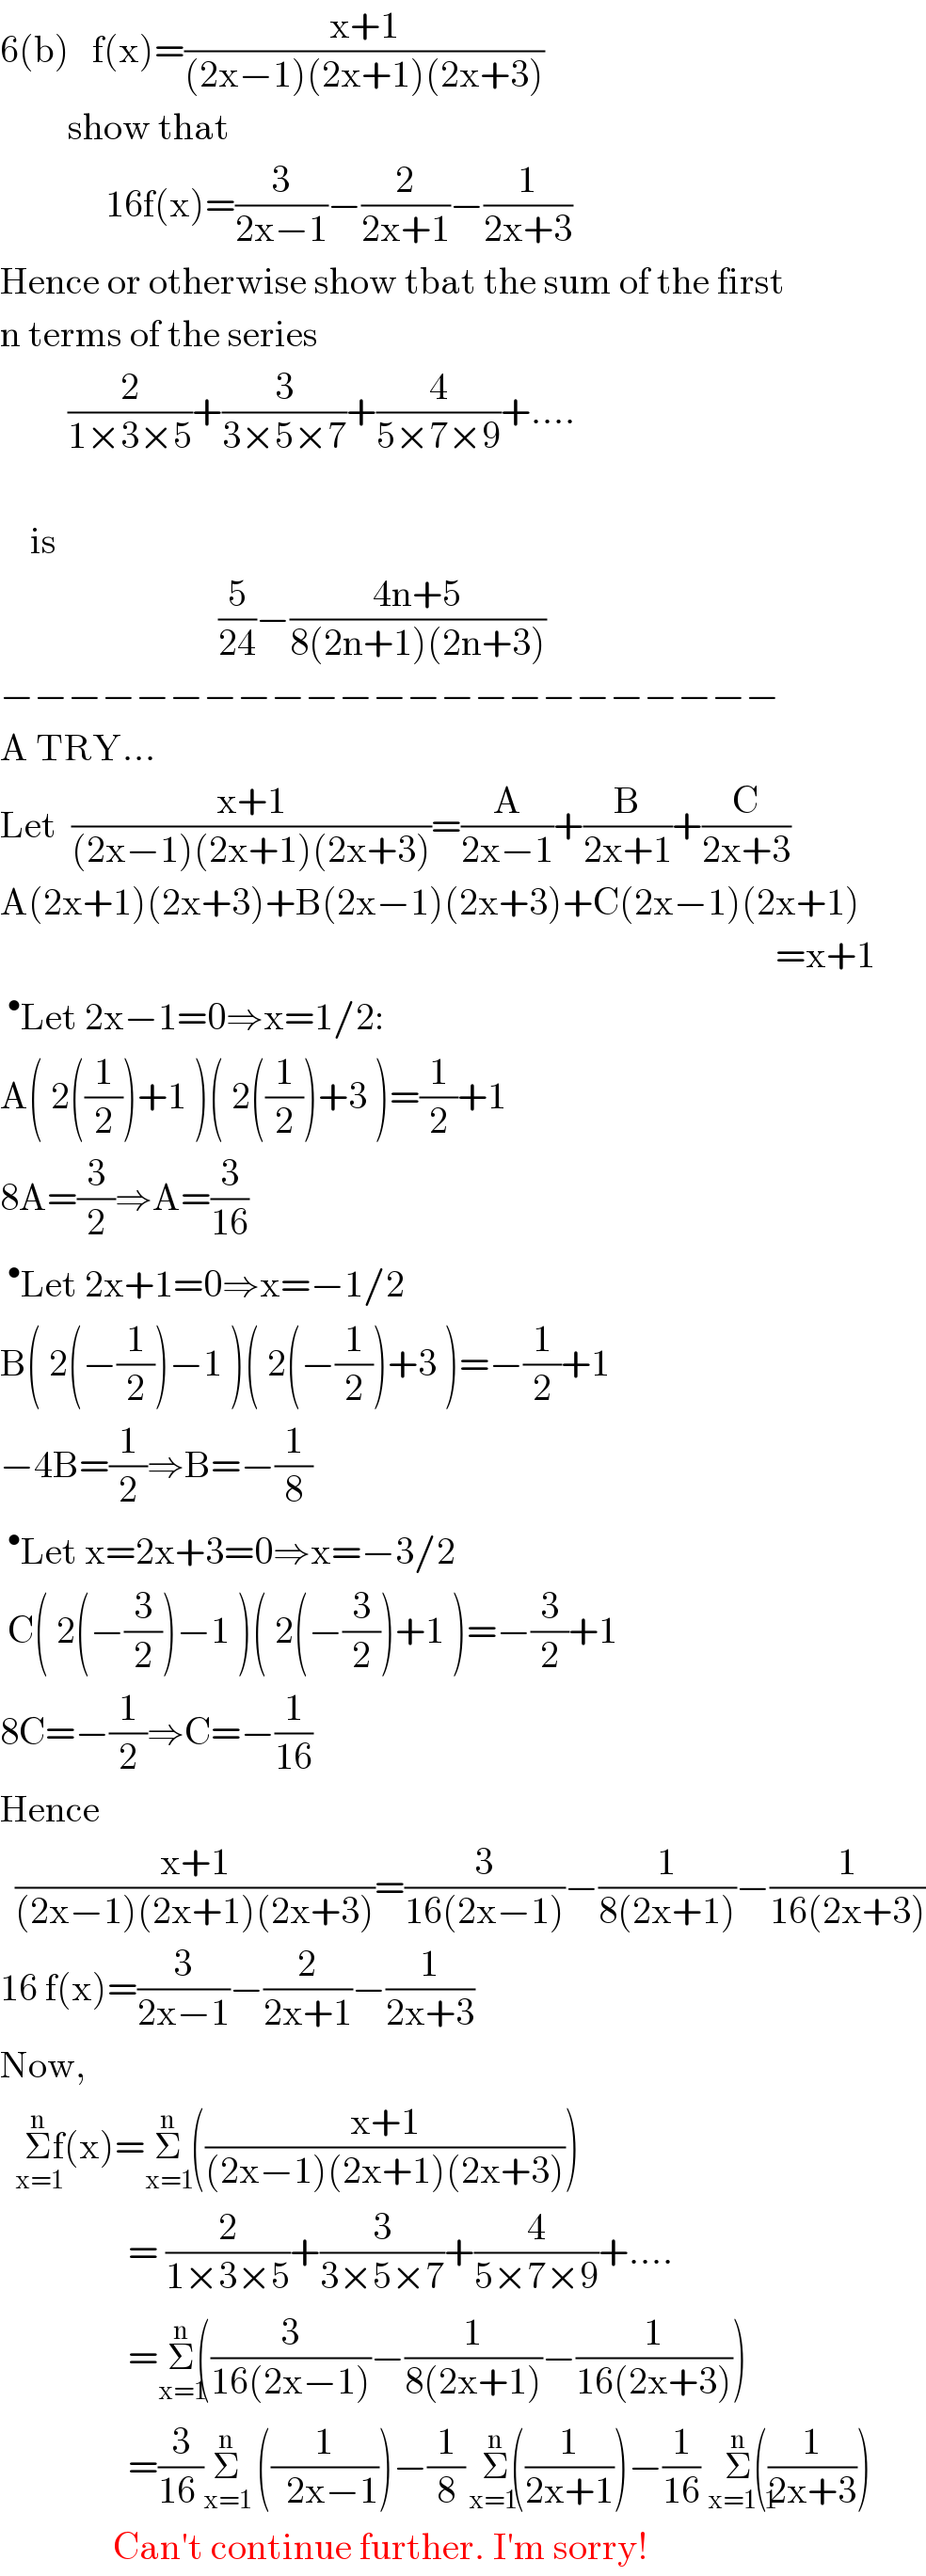 6(b)   f(x)=((x+1)/((2x−1)(2x+1)(2x+3)))           show that                 16f(x)=(3/(2x−1))−(2/(2x+1))−(1/(2x+3))  Hence or otherwise show tbat the sum of the first  n terms of the series           (2/(1×3×5))+(3/(3×5×7))+(4/(5×7×9))+....        is                               (5/(24))−((4n+5)/(8(2n+1)(2n+3)))  −−−−−−−−−−−−−−−−−−−−−−−  A TRY...  Let  ((x+1)/((2x−1)(2x+1)(2x+3)))=(A/(2x−1))+(B/(2x+1))+(C/(2x+3))  A(2x+1)(2x+3)+B(2x−1)(2x+3)+C(2x−1)(2x+1)                                                                                                         =x+1  ^• Let 2x−1=0⇒x=1/2:  A( 2((1/2))+1 )( 2((1/2))+3 )=(1/2)+1  8A=(3/2)⇒A=(3/(16))  ^• Let 2x+1=0⇒x=−1/2  B( 2(−(1/2))−1 )( 2(−(1/2))+3 )=−(1/2)+1  −4B=(1/2)⇒B=−(1/8)  ^• Let x=2x+3=0⇒x=−3/2   C( 2(−(3/2))−1 )( 2(−(3/2))+1 )=−(3/2)+1  8C=−(1/2)⇒C=−(1/(16))  Hence     ((x+1)/((2x−1)(2x+1)(2x+3)))=(3/(16(2x−1)))−(1/(8(2x+1)))−(1/(16(2x+3)))  16 f(x)=(3/(2x−1))−(2/(2x+1))−(1/(2x+3))  Now,    Σ_(x=1) ^(n) f(x)=Σ_(x=1) ^(n)  (((x+1)/((2x−1)(2x+1)(2x+3))))                   = (2/(1×3×5))+(3/(3×5×7))+(4/(5×7×9))+....                   =Σ_(x=1) ^(n) ((3/(16(2x−1)))−(1/(8(2x+1)))−(1/(16(2x+3))))                   =(3/(16 ))Σ_(x=1) ^(n)   ((1/(  2x−1)))−(1/8)Σ_( x=1   ) ^(n) ((1/(2x+1)))−(1/(16))Σ_(  x=1  1) ^(n) ((1/(2x+3)))                 Can′t continue further. I′m sorry!  